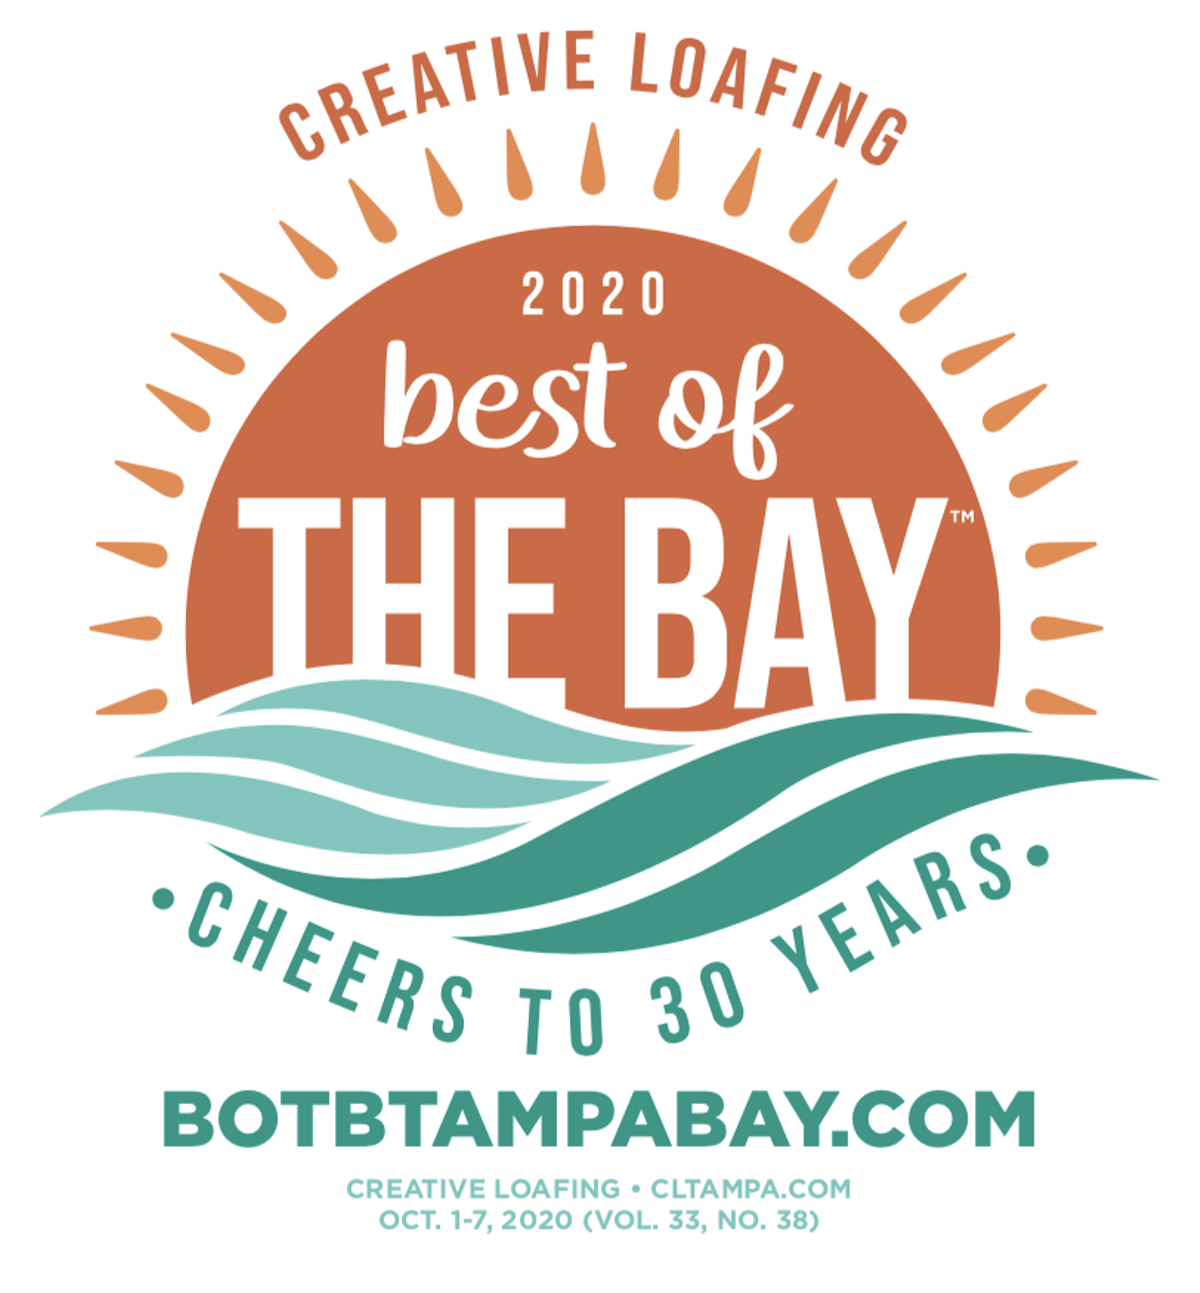 Best of the Bay 2020